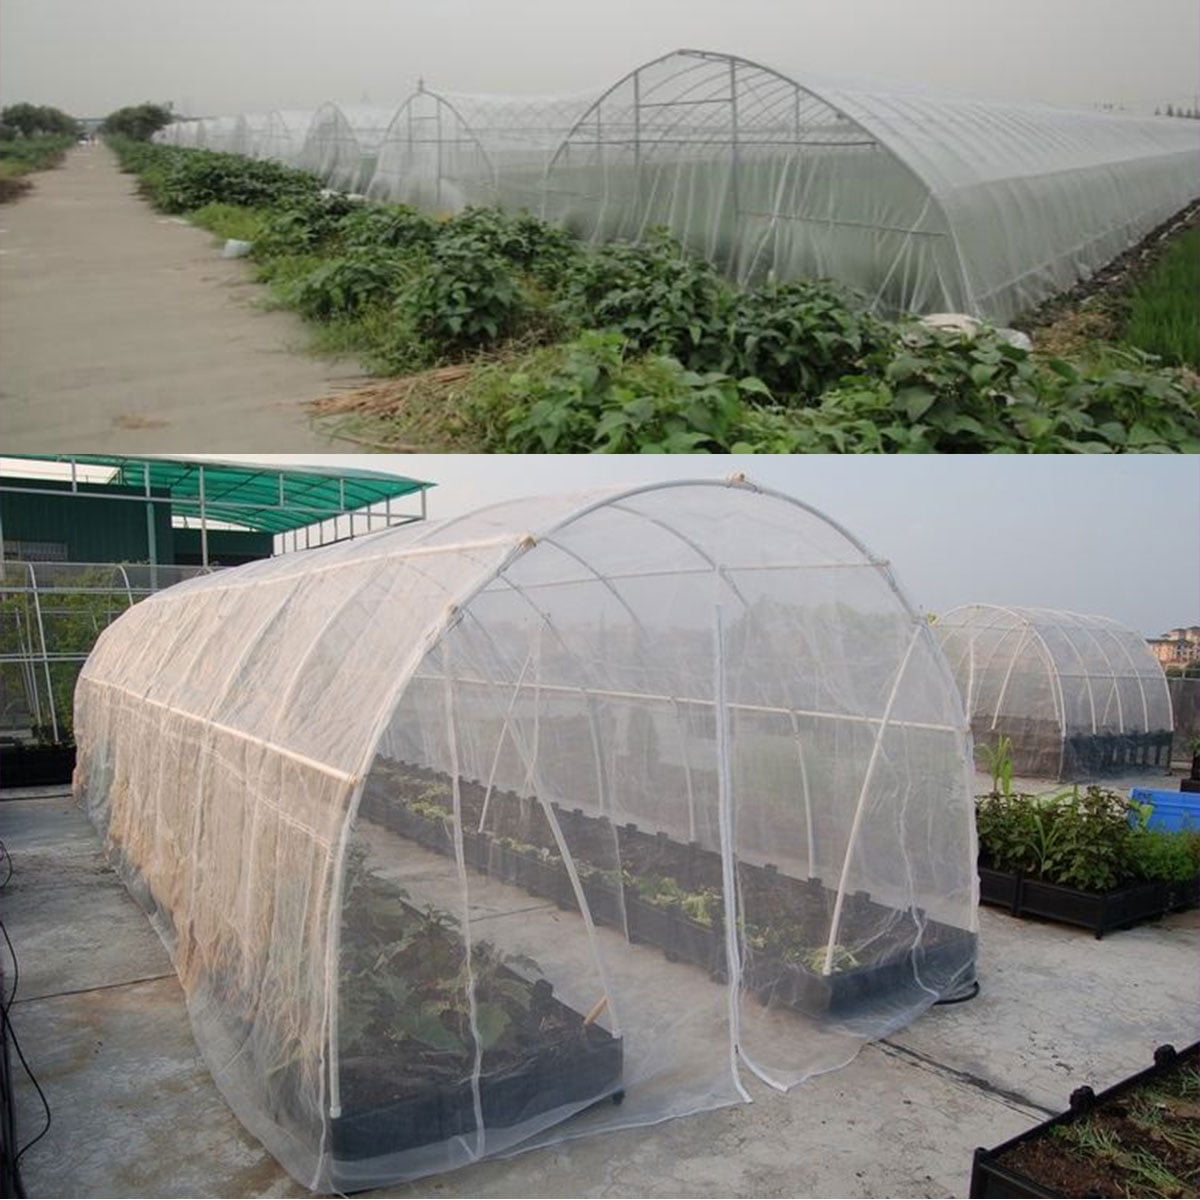 PROTECT SEEDLINGS / VEGETABLES / SOFT FRUITS / PLANTS / PONDS BRAND NEW CAN BE CUT TO REQUIRED SIZE 8 x NEW GARDEN NETTING FINE STRONG MESH EACH 2m x 10m